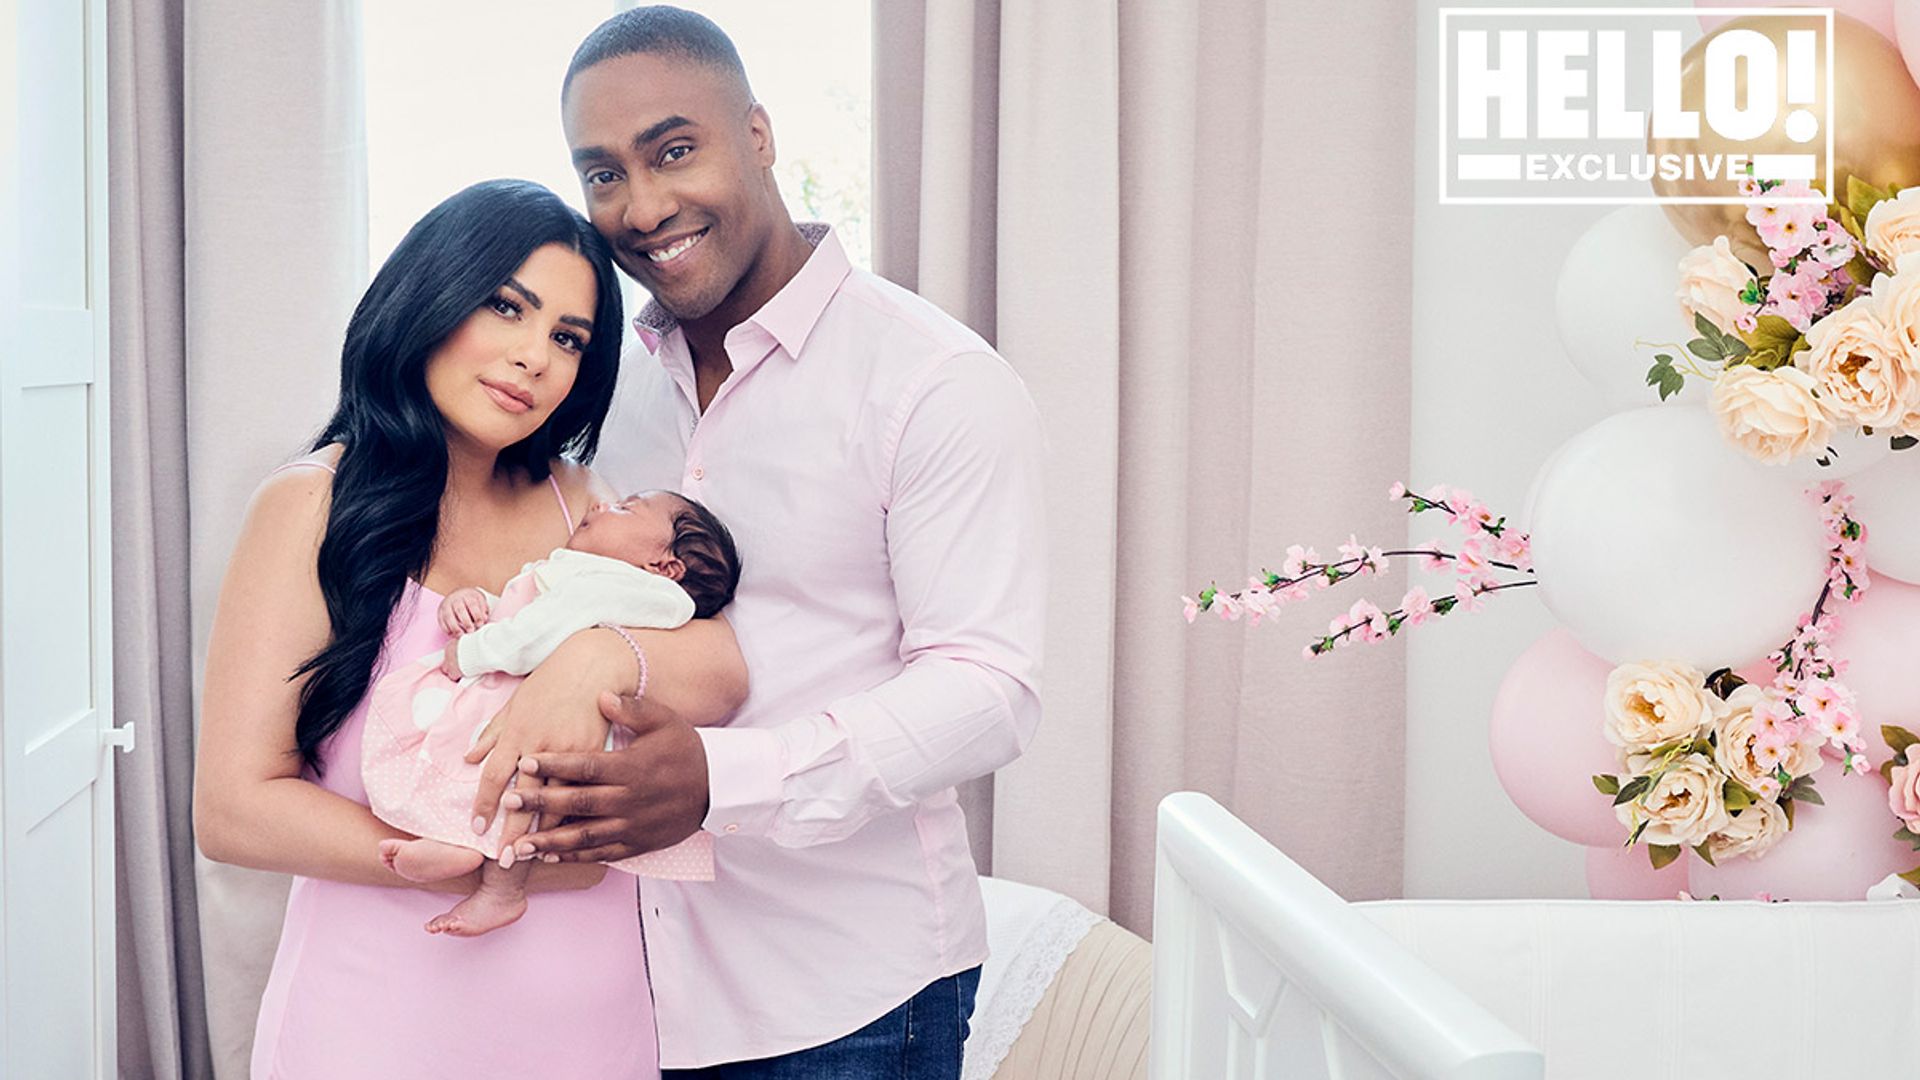 Exclusive: Simon Webbe and wife Ayshen introduce baby girl and reveal her name